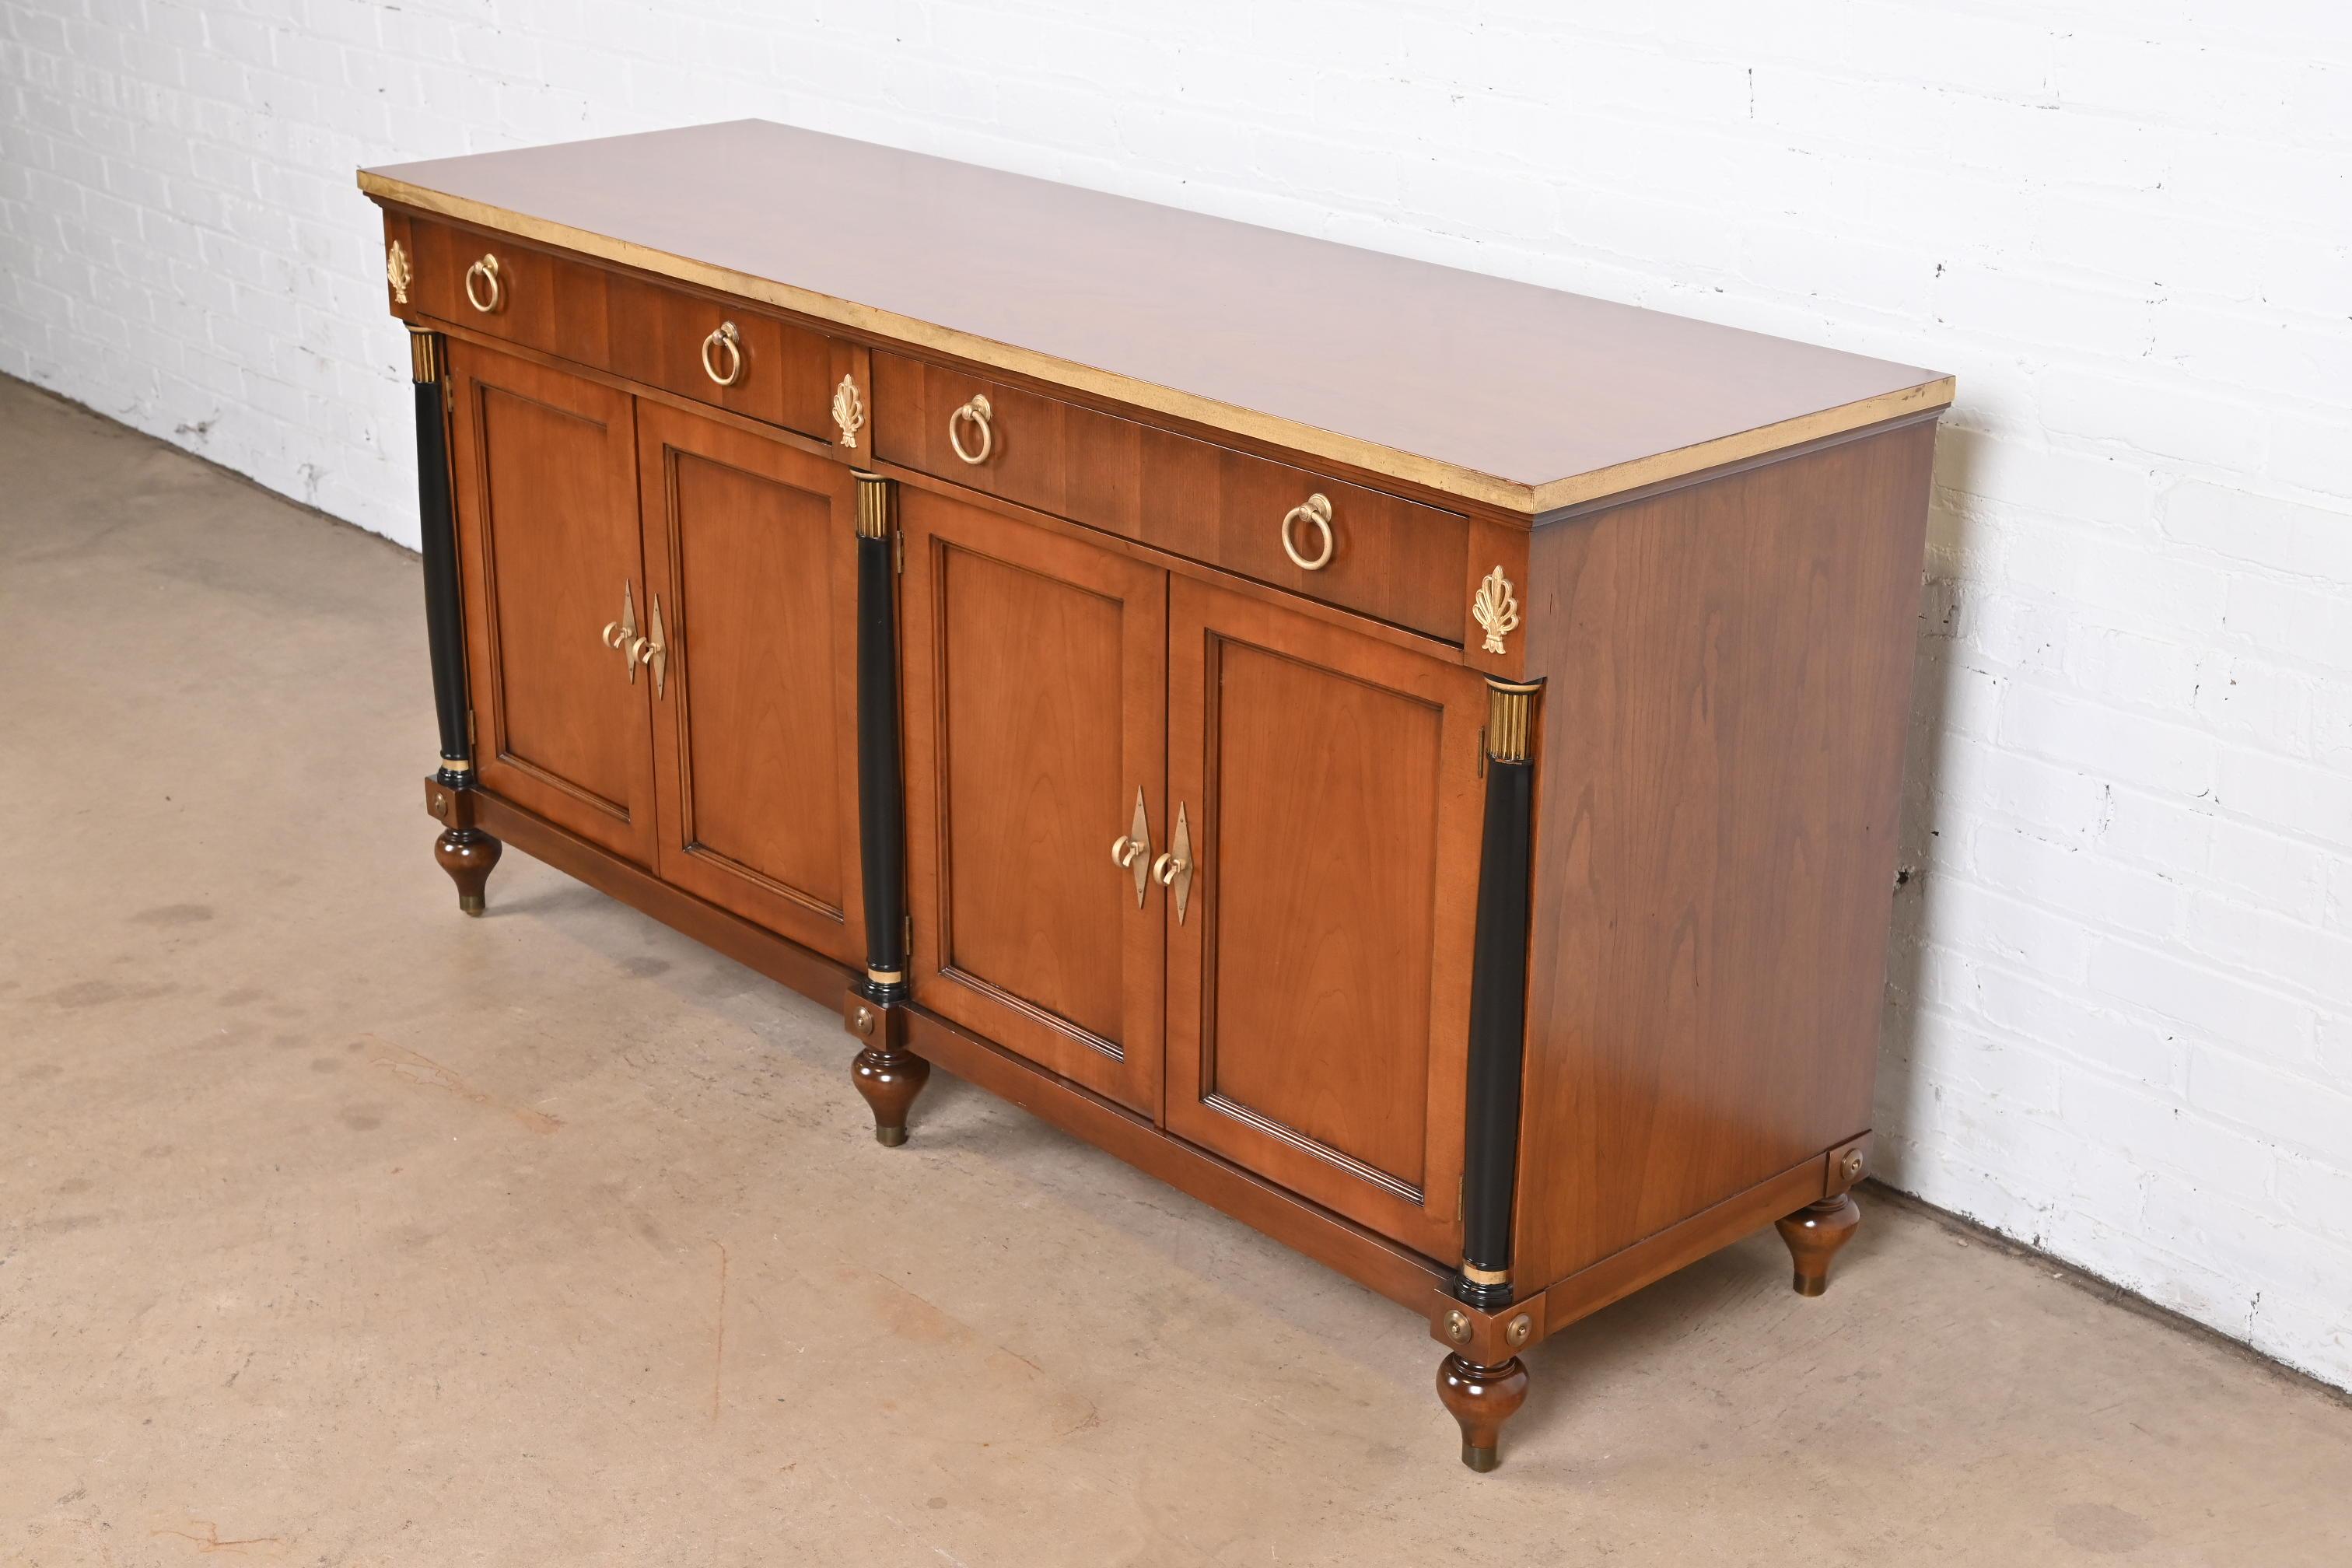 20th Century Baker Furniture French Regency Louis XVI Cherry Wood Sideboard or Bar Cabinet